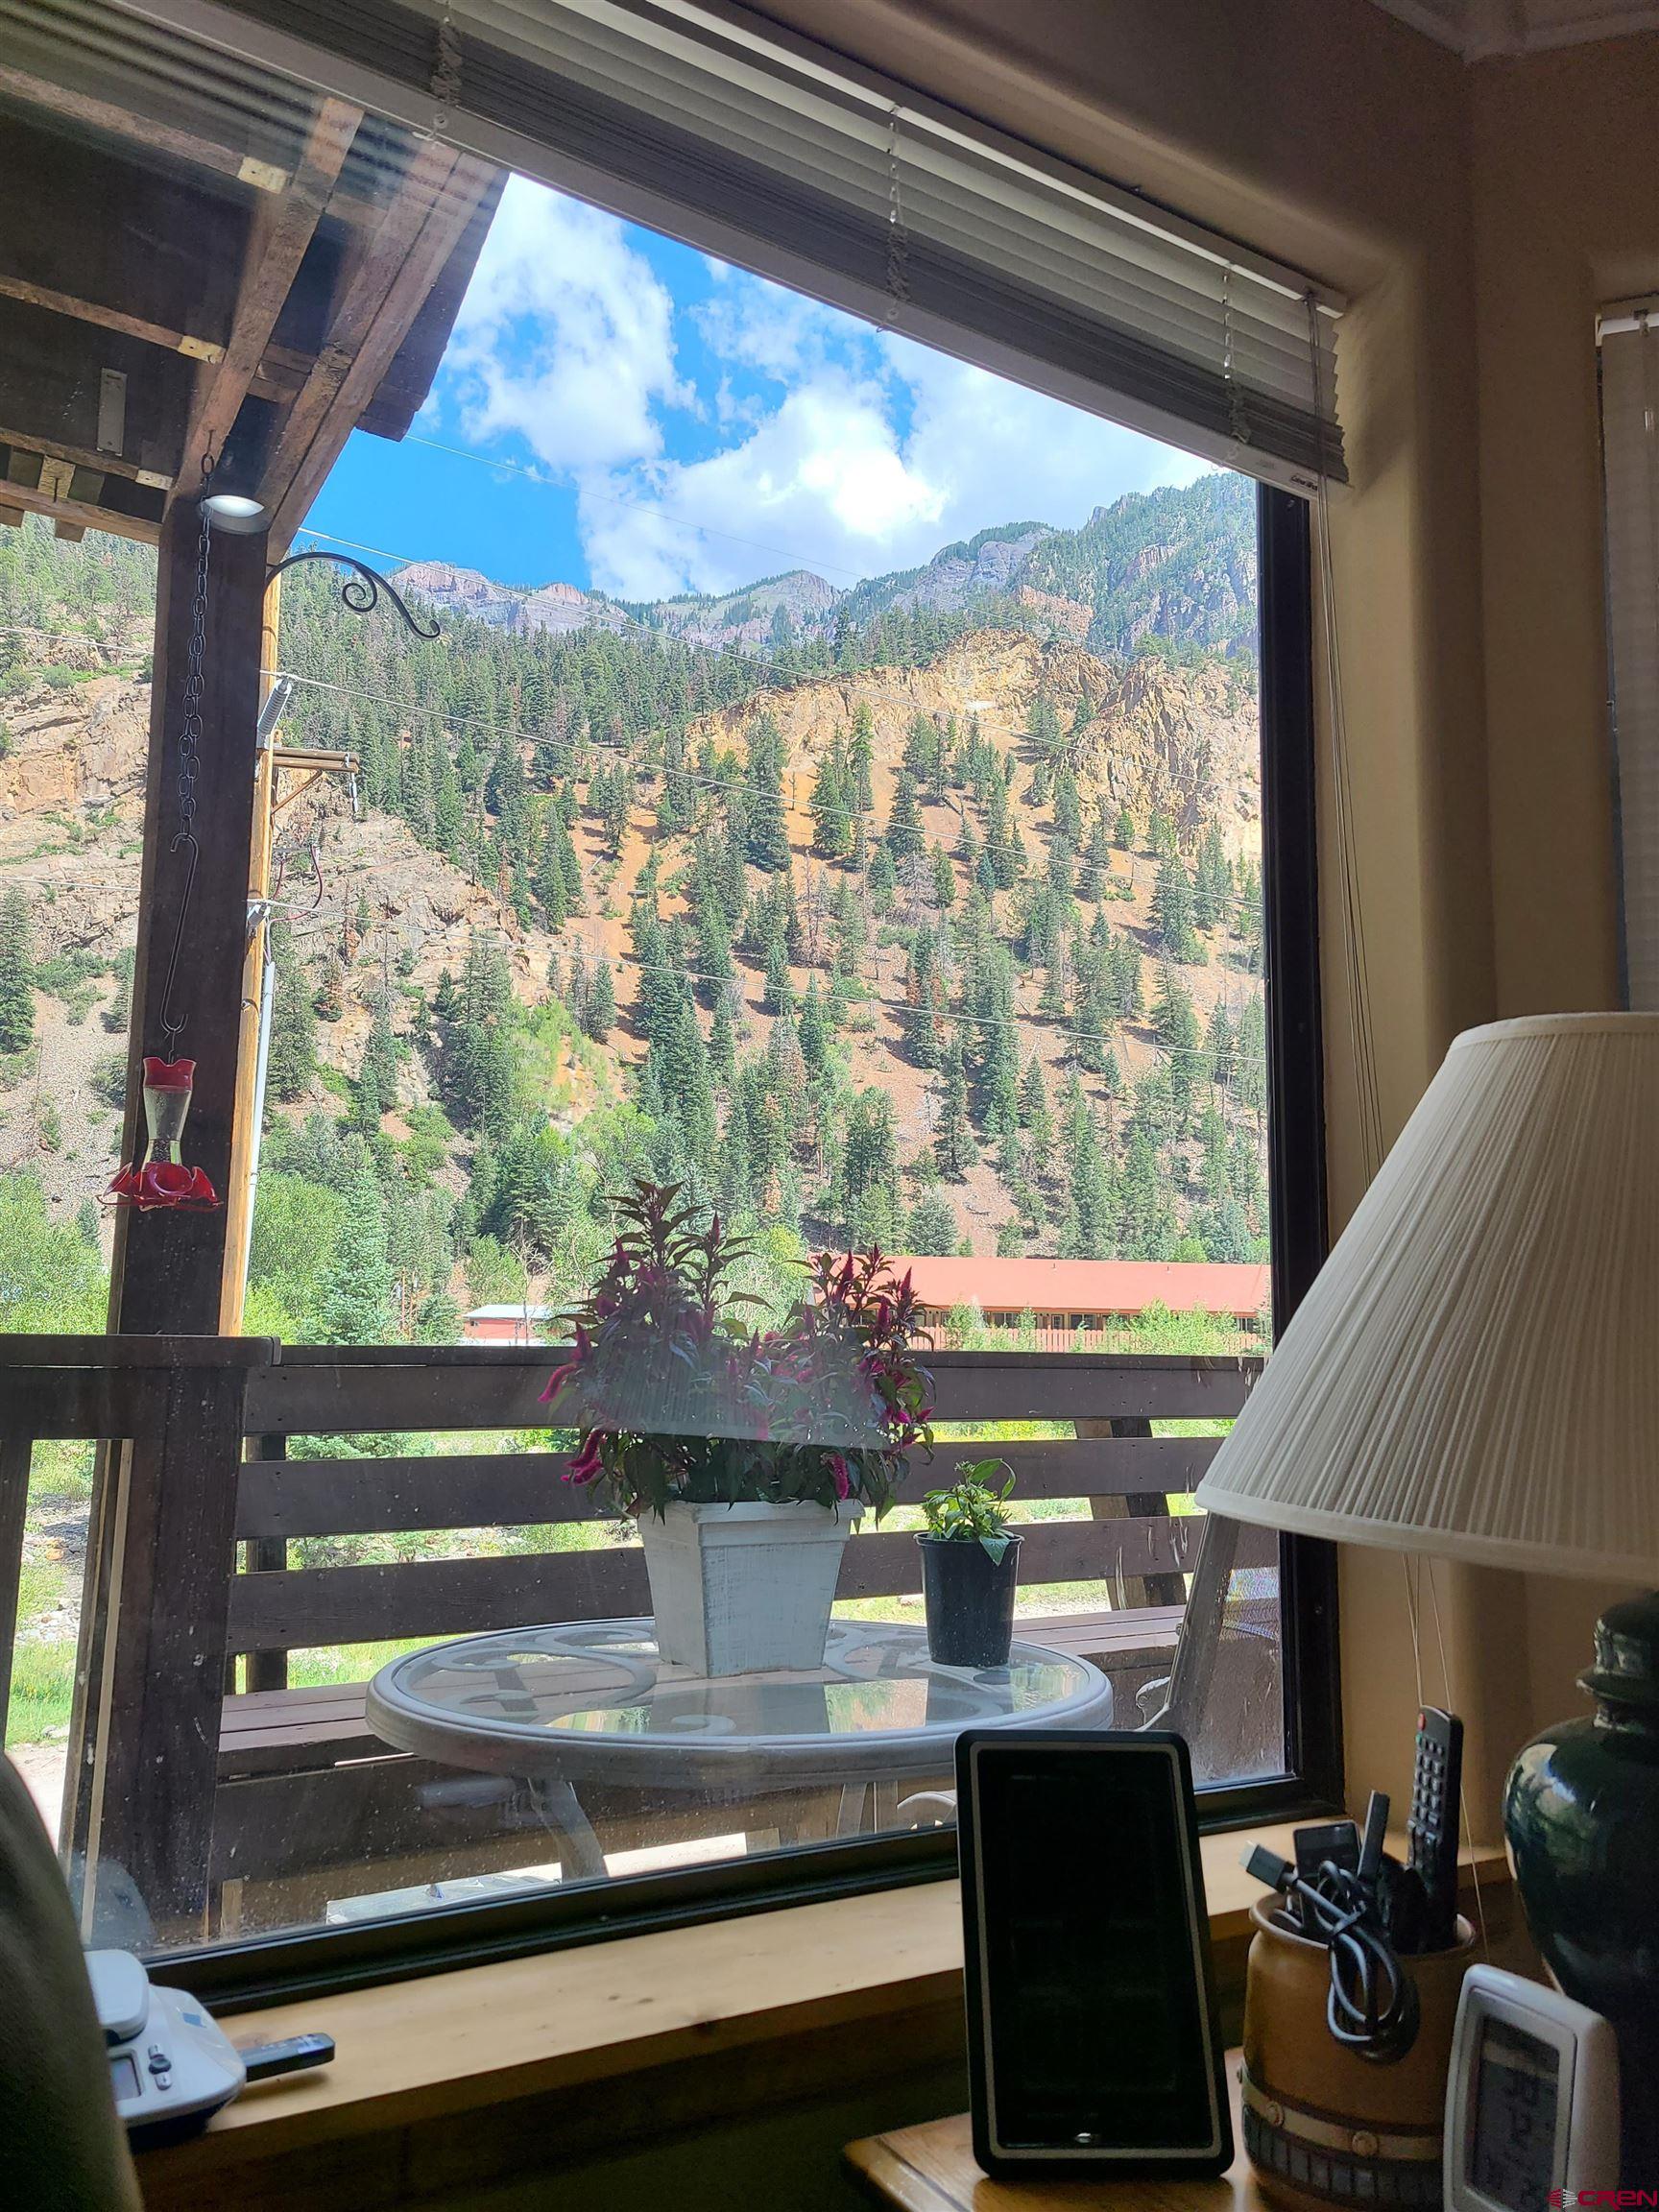 Two bedroom condo with a garage available for short term rental or delightful residence. All new appliances, flooring, cabinets, furniture in 2019. In addition to the front deck, there is a back patio and barbecue with shade in the afternoon. Beautiful and ready to move right in. Located in North Ouray with views of the mountains and the river trail right across the street. Furniture is available for an additional price.